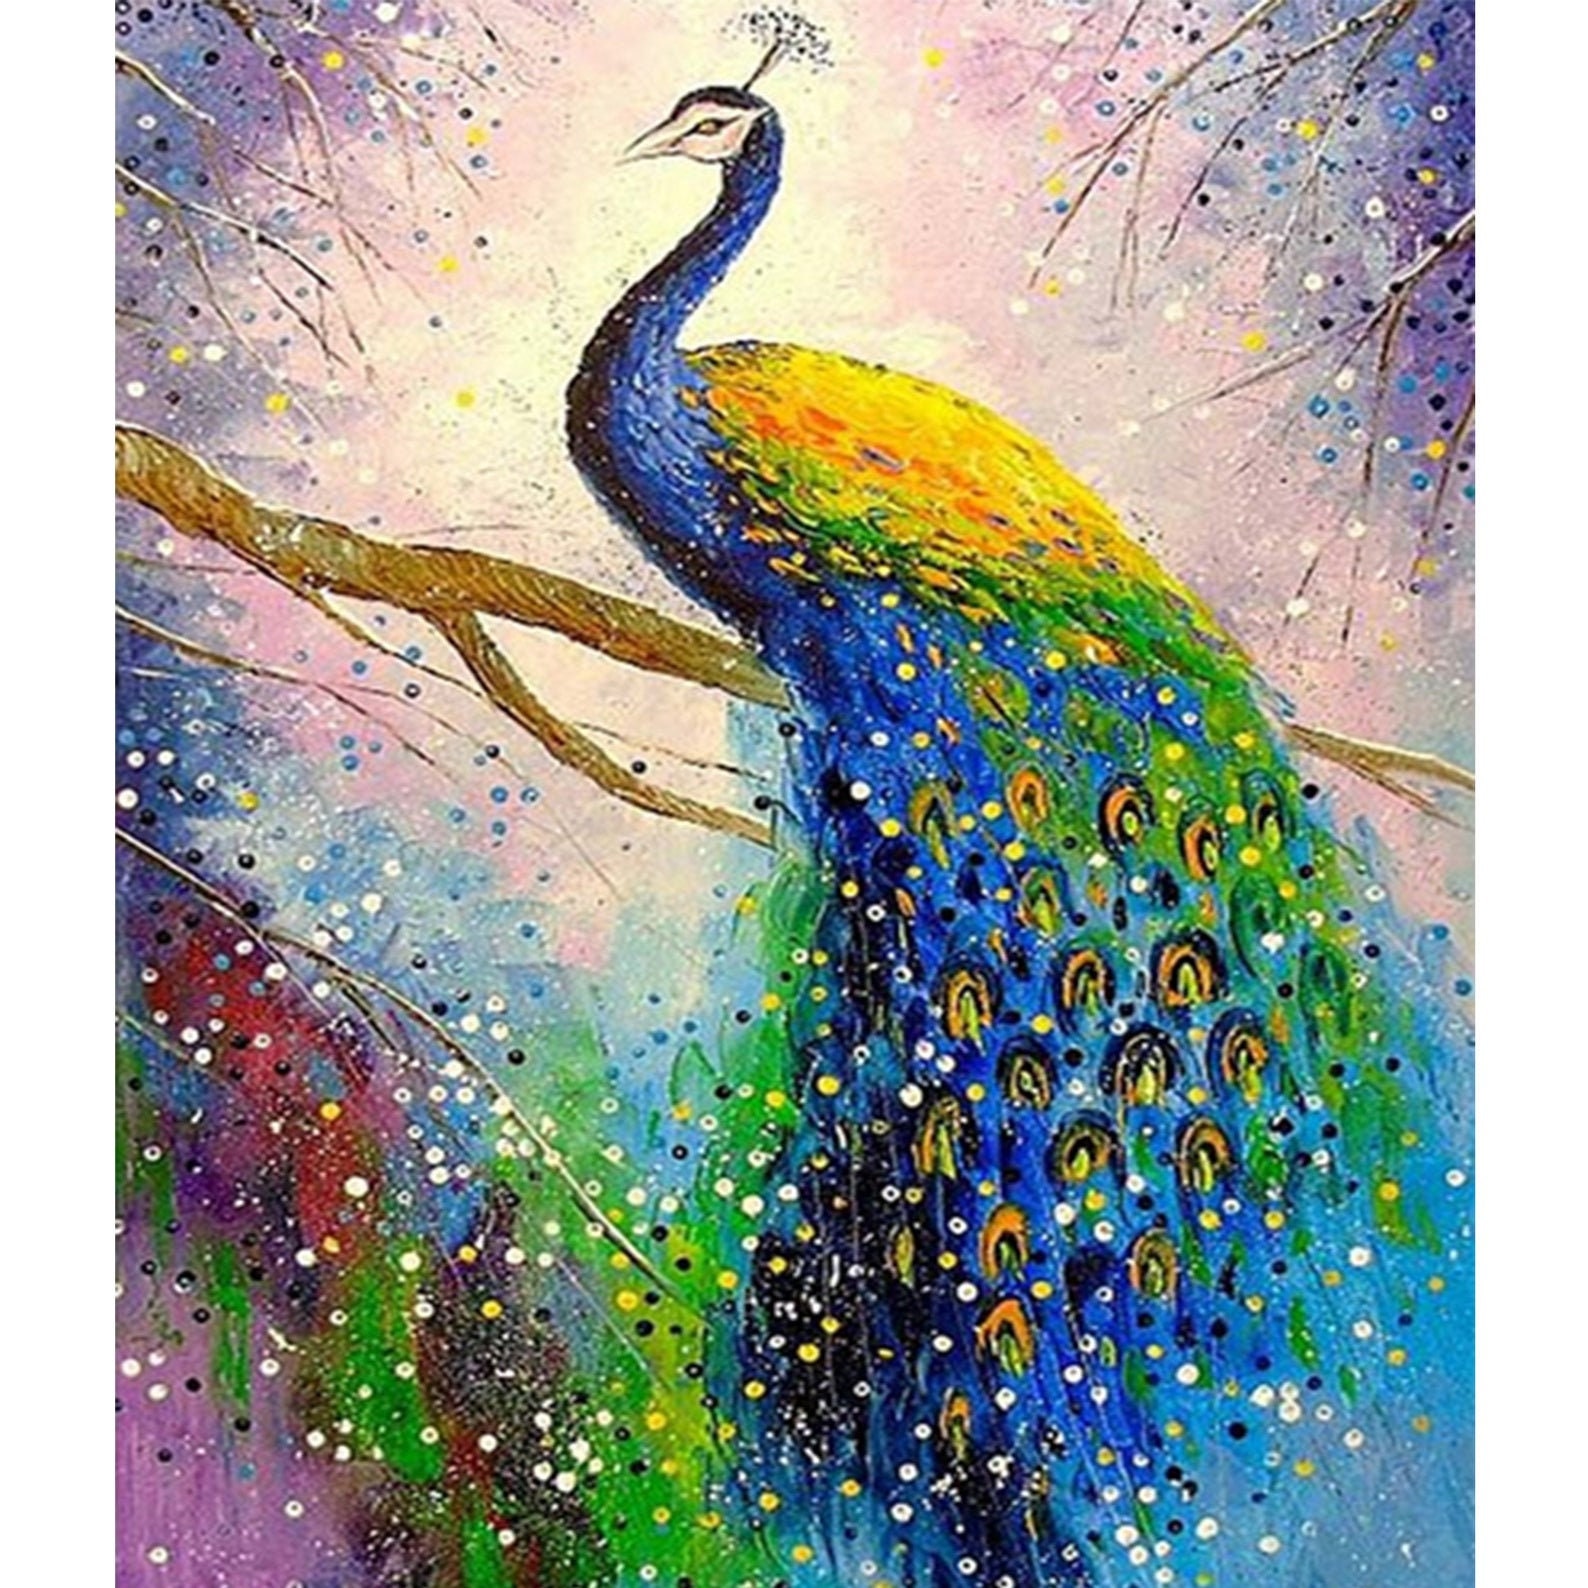 Peacock DIY Bookmarks 5D Diamond Painting LEKUKY Full Special Shaped Drill Number Kit Cross Stitch Embroidery Kit with Tassel Leather for Art Craft Home Decor Kids Adults 